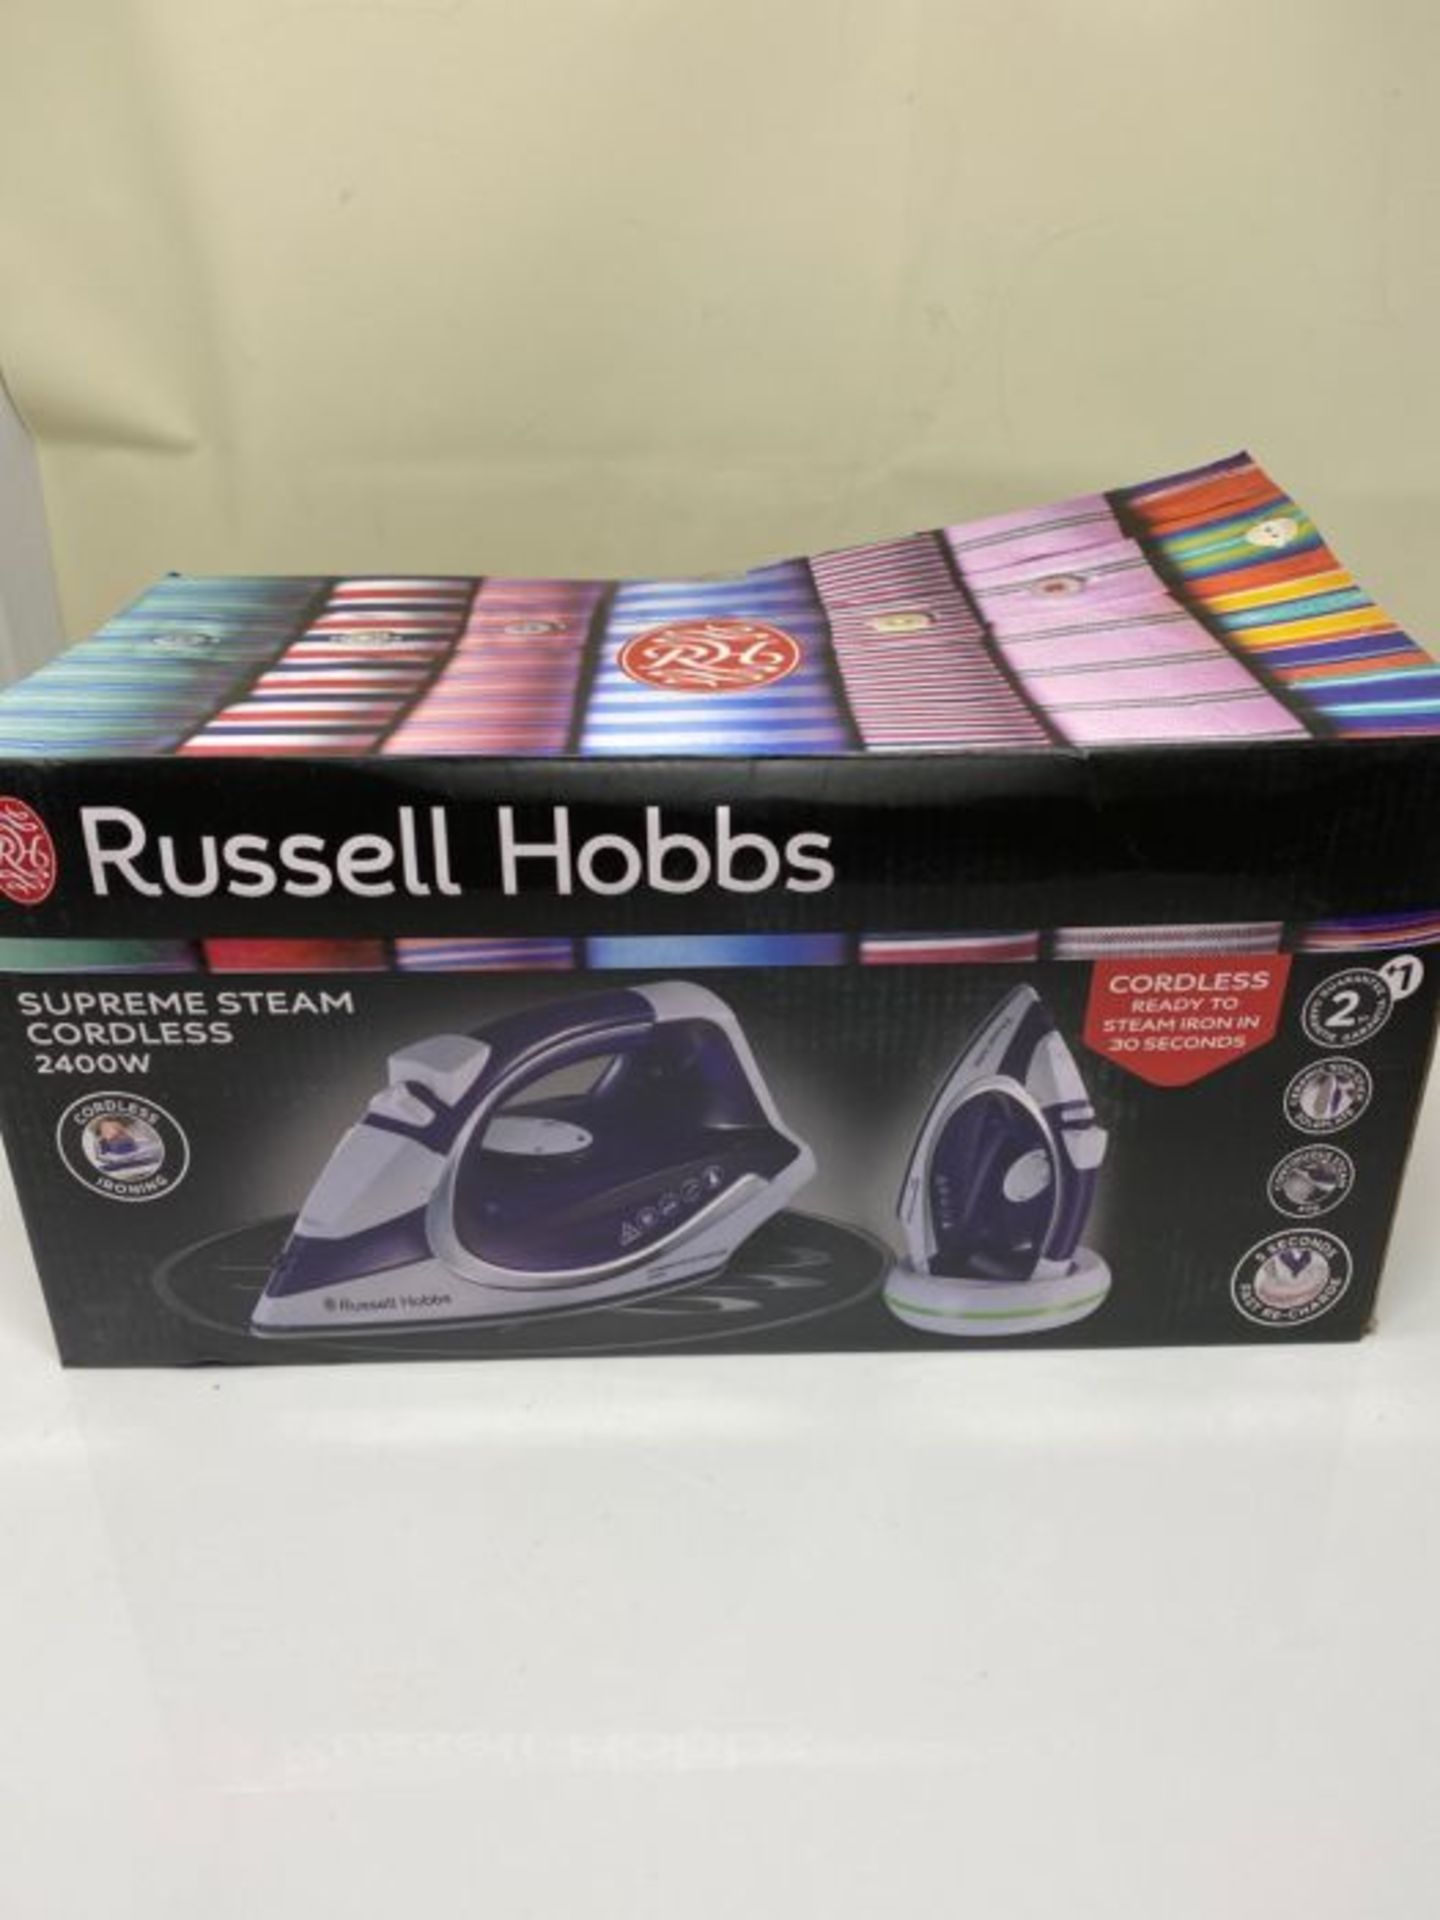 RRP £56.00 Russell Hobbs 23300-56 Steam Iron Supreme steam-23300-56, Blue, White - Image 2 of 3